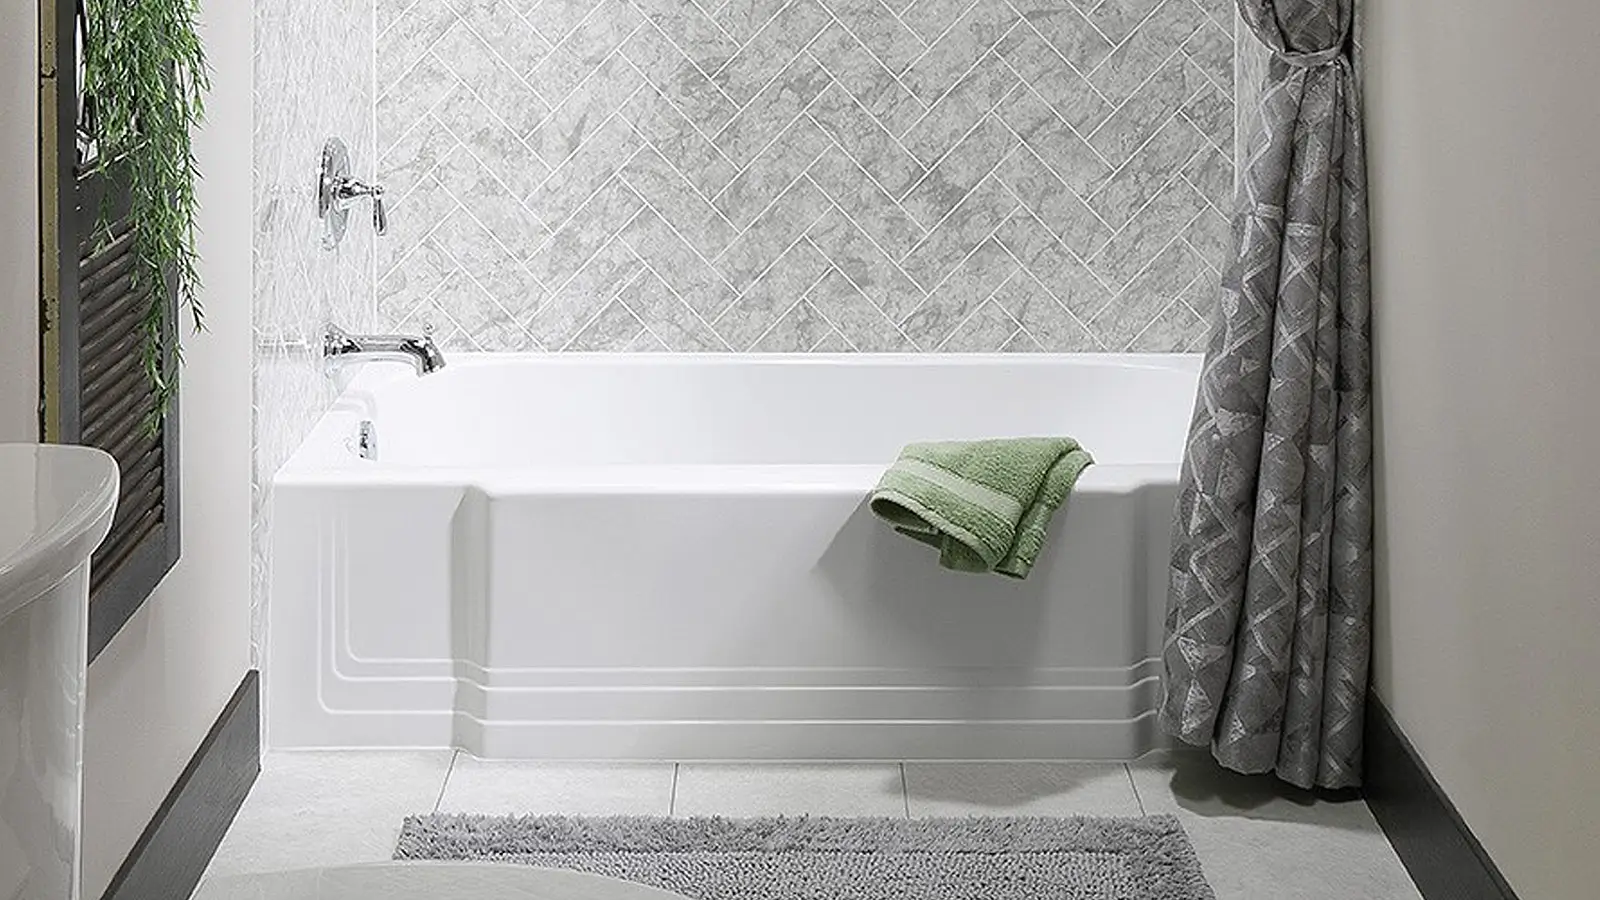 Bathtub remodel example with etched tile look